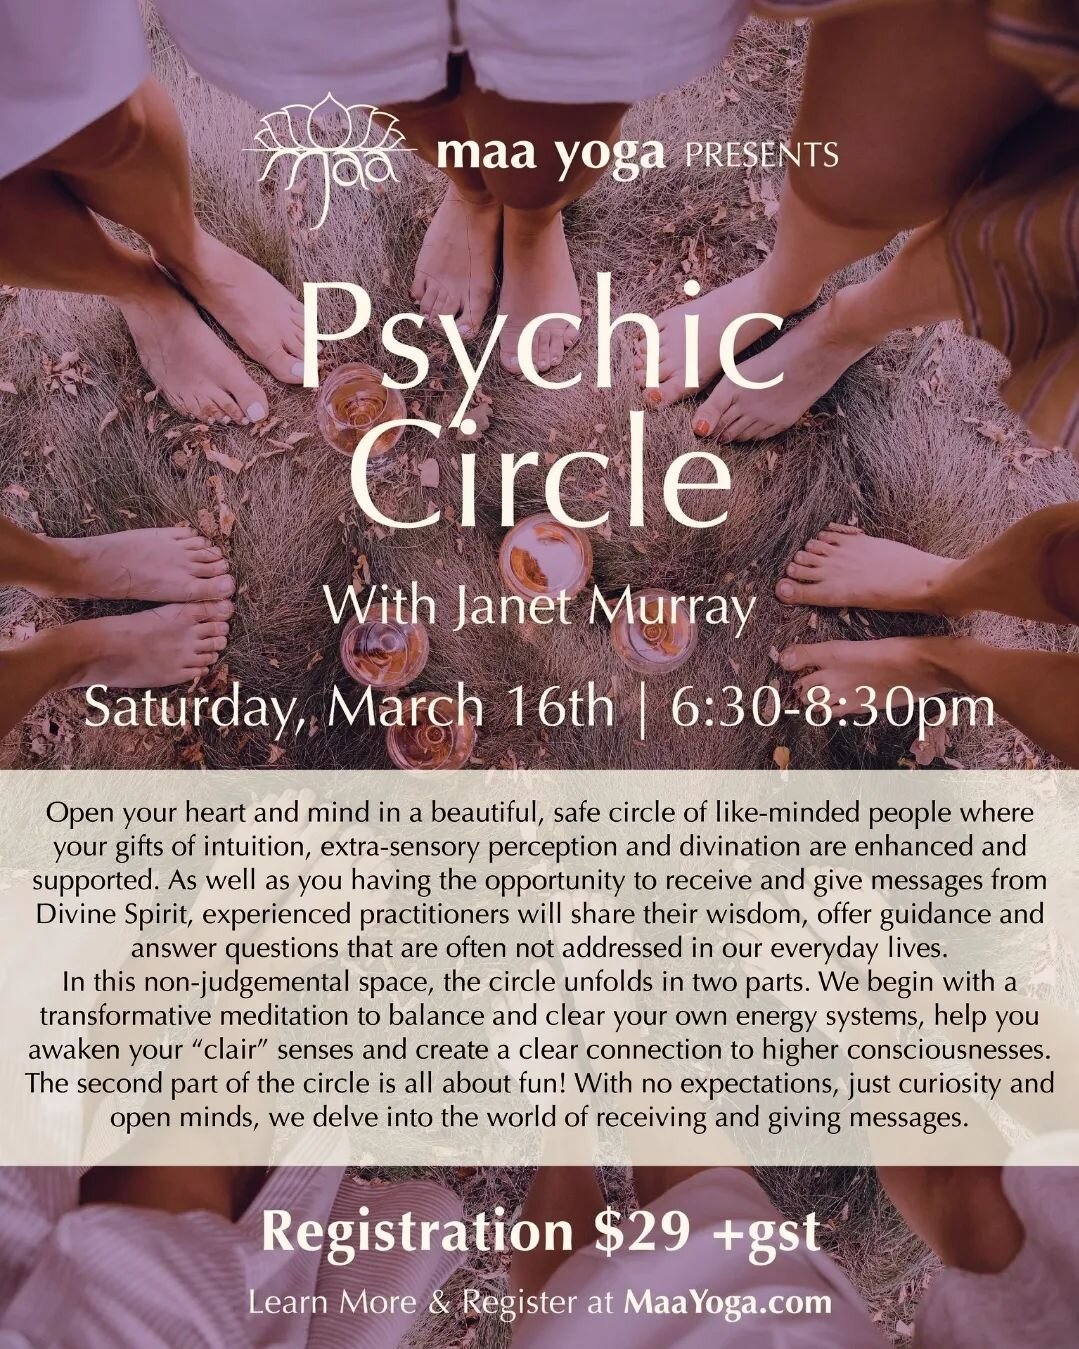 Saturday, March 16th | 6:30 - 8:30 pm.  Open your heart ❤️and mind 🧠in a beautiful, safe circle of like-minded people where your gifts of intuition🙇, extra sensory perception👀 and divination ⁉️are enhanced and supported.💝

As well as you having t